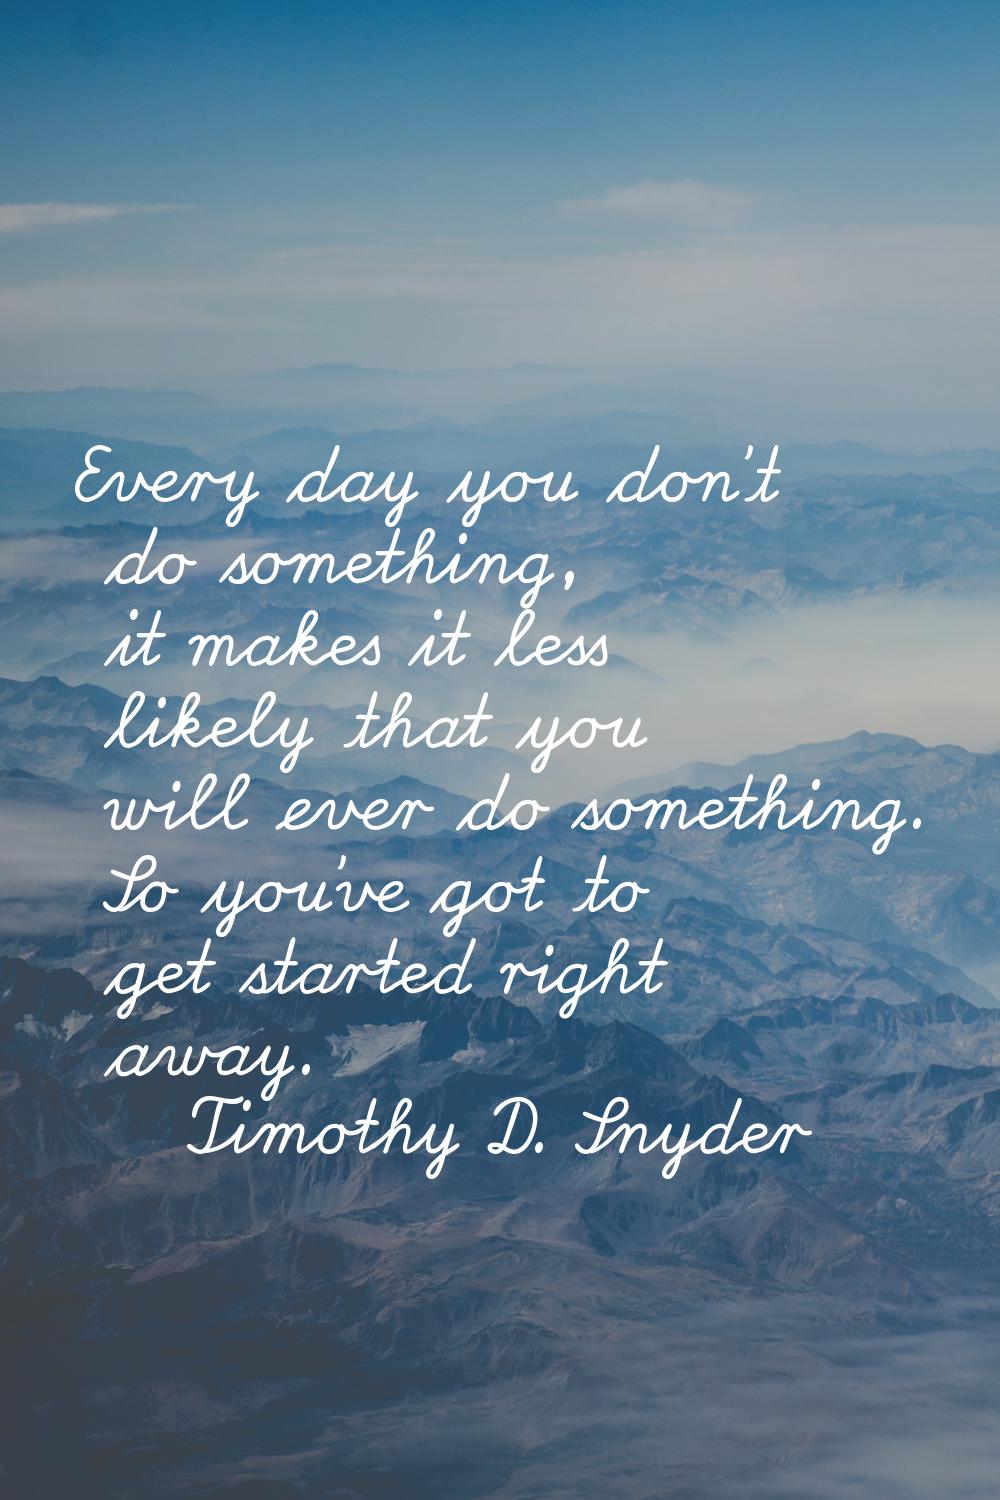 Every day you don't do something, it makes it less likely that you will ever do something. So you'v